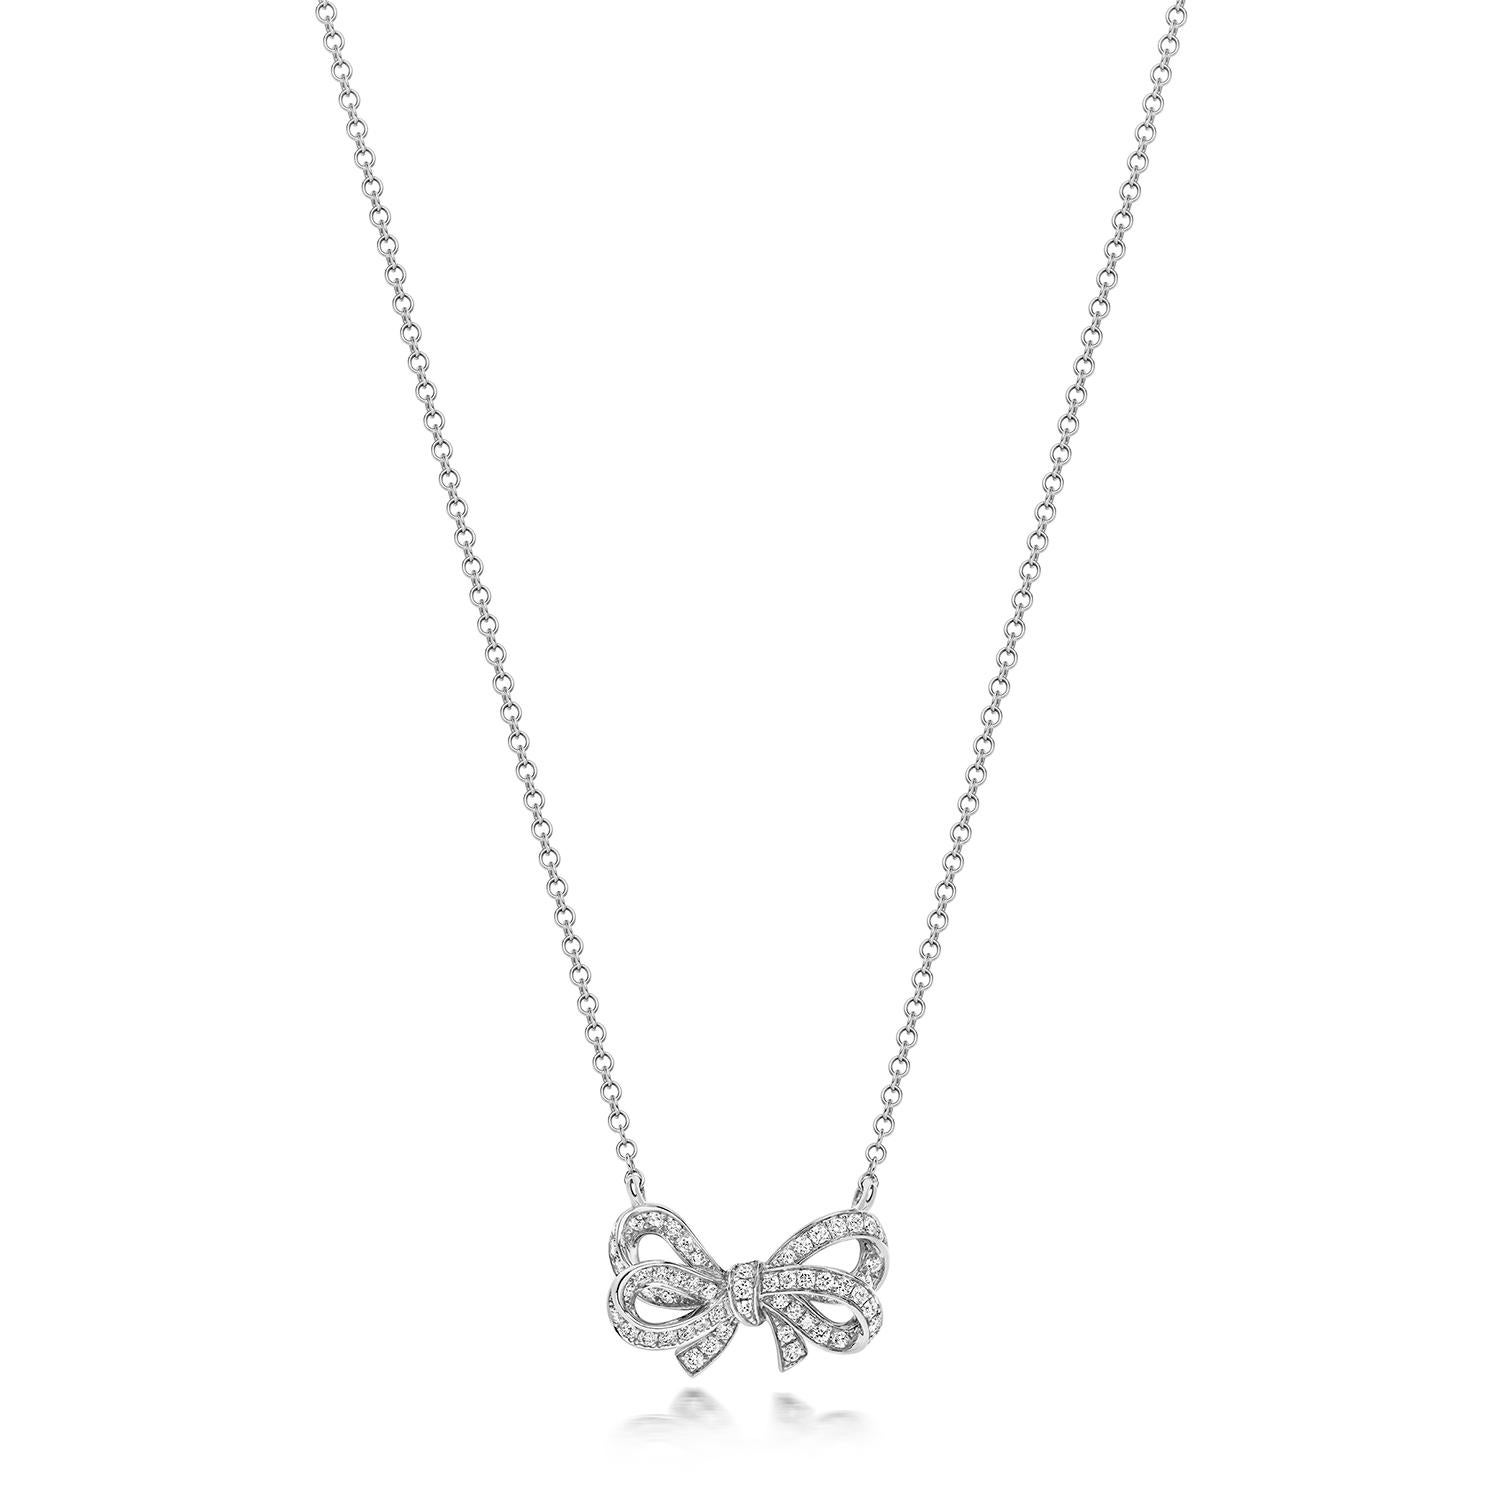 DIAMOND BOW NECKLACE

18CT W/G G VS 0.30CT

Weight: 4.01g

Number Of Stones:58

Total Carates:0.300